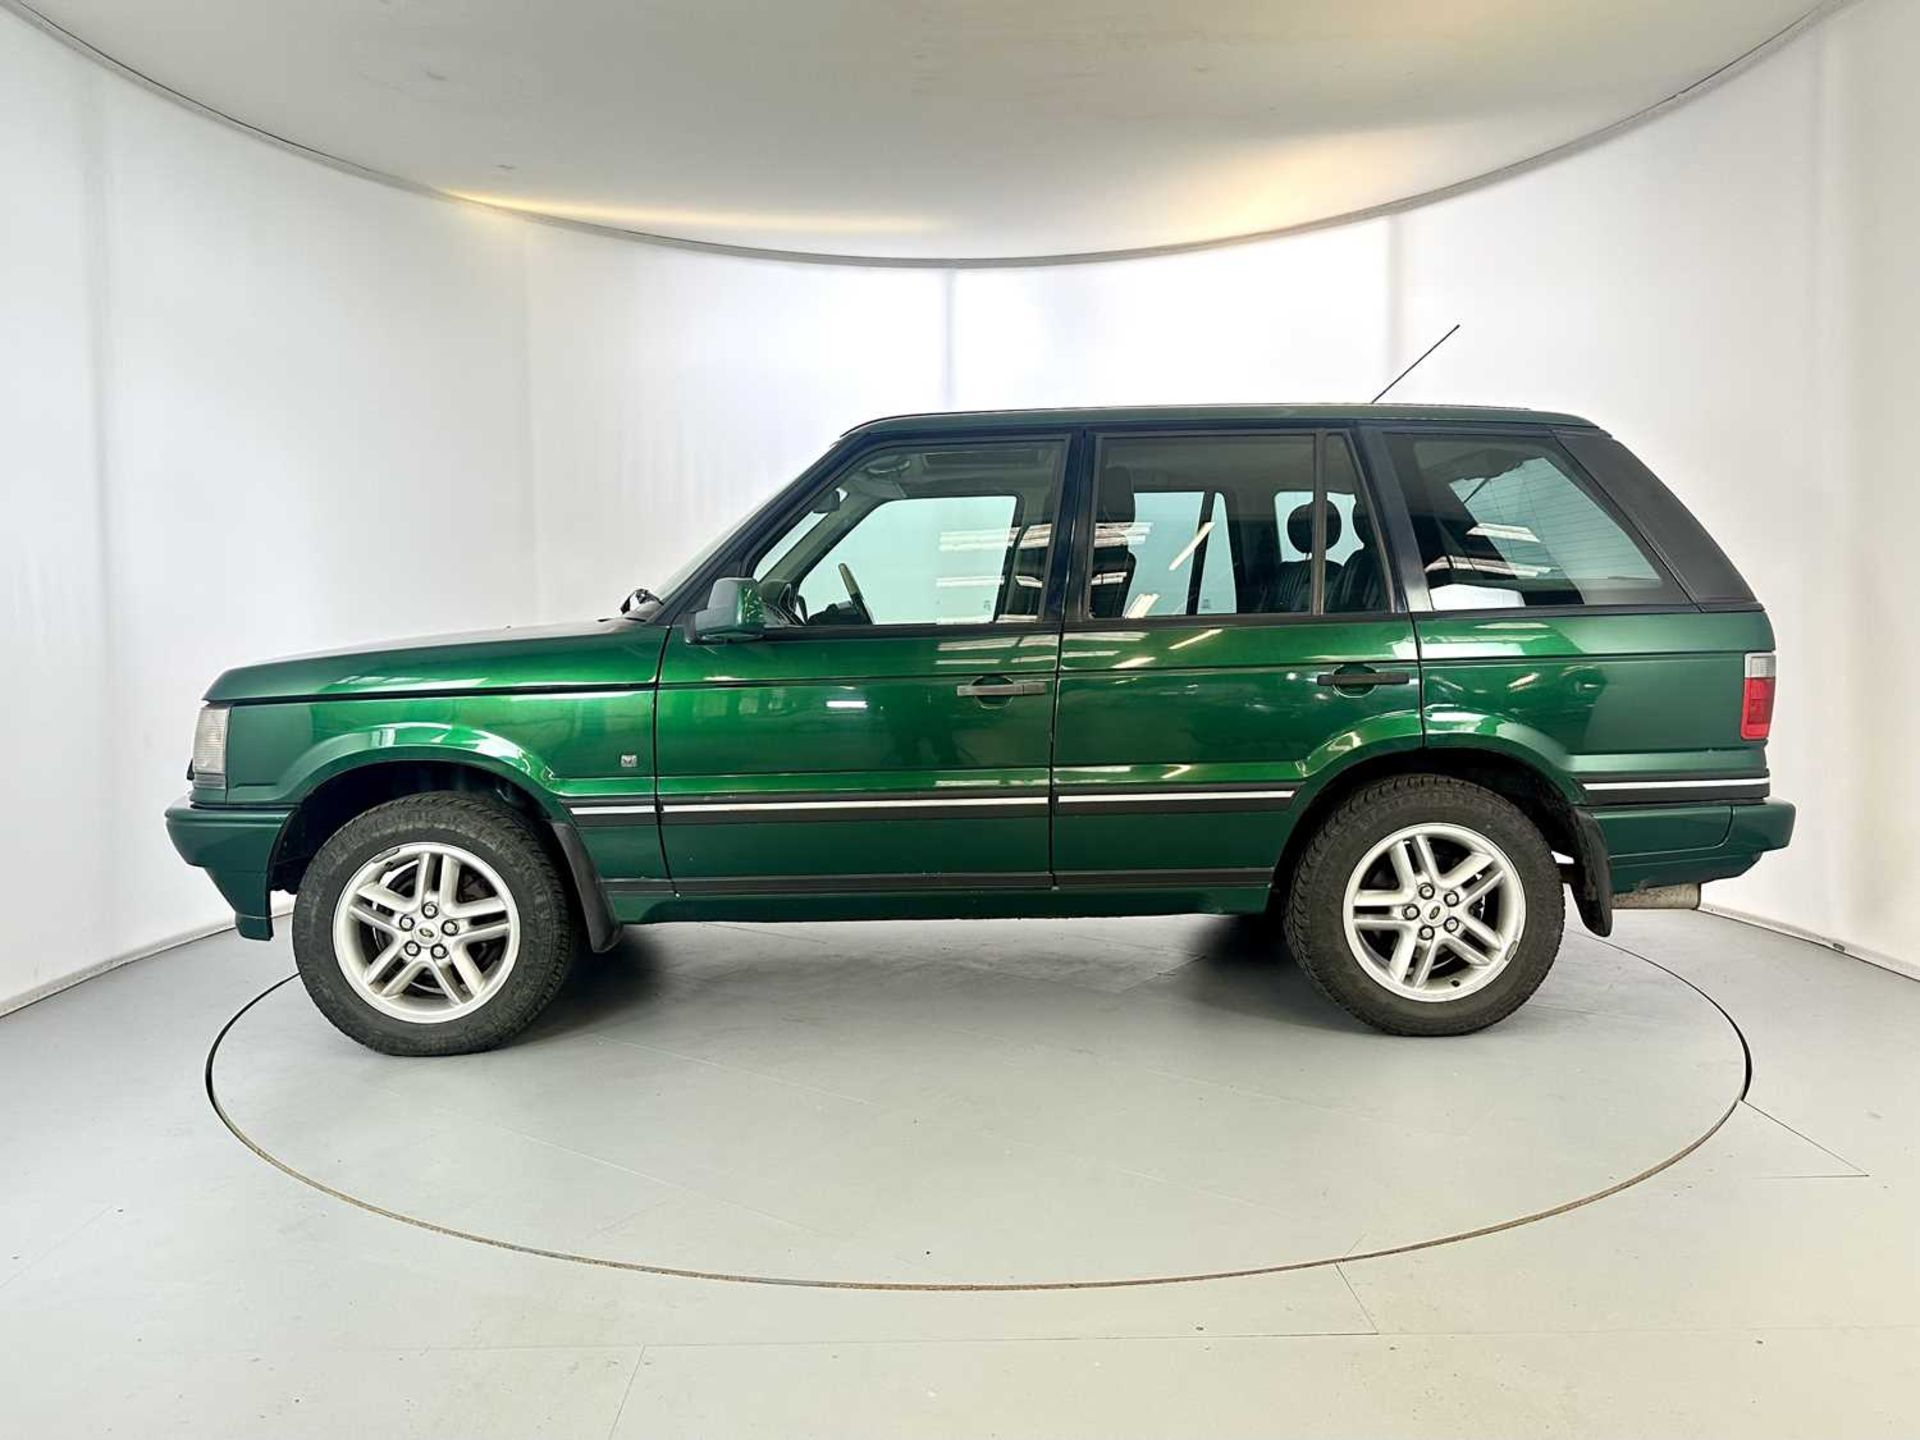 2001 Land Rover Range Rover 30th Anniversary Edition - Image 5 of 35